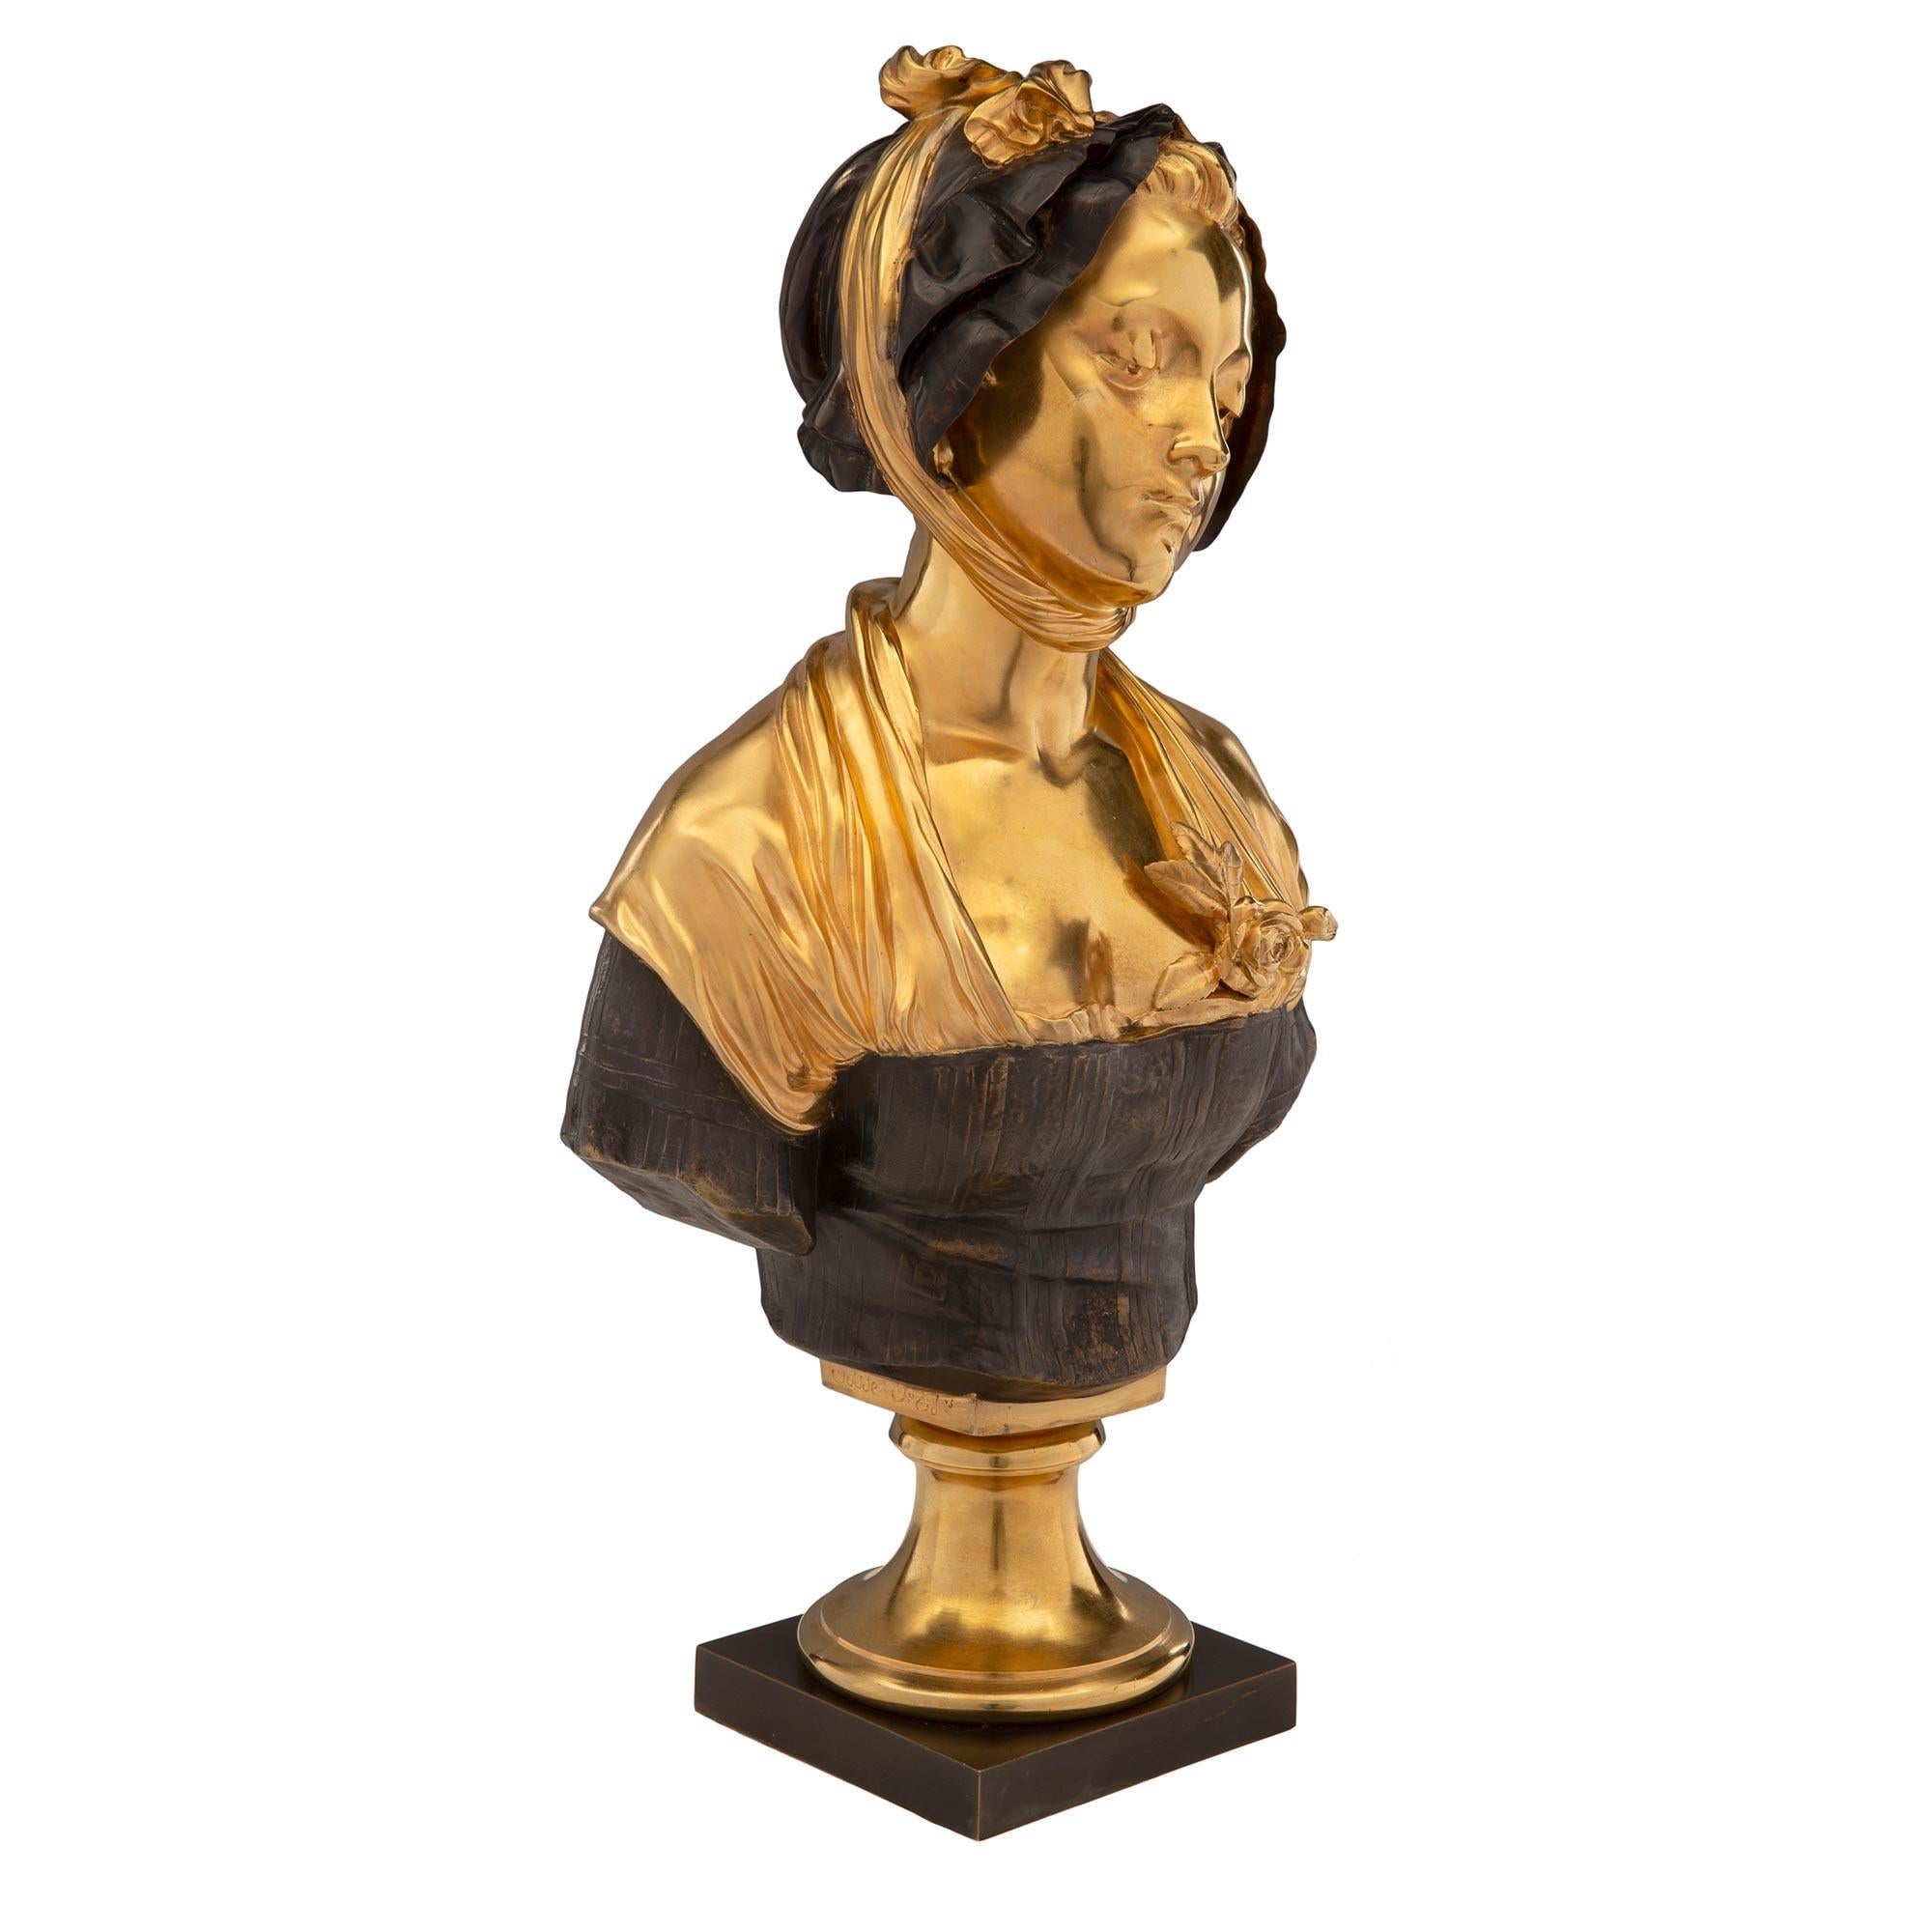 A charming French mid 19th century patinated bronze and ormolu bust of a young lady, signed by Elie-Joseph Laurent. The bust is raised by a square patinated bronze pedestal below a circular ormolu socle. The young lady is wearing a striped blouse